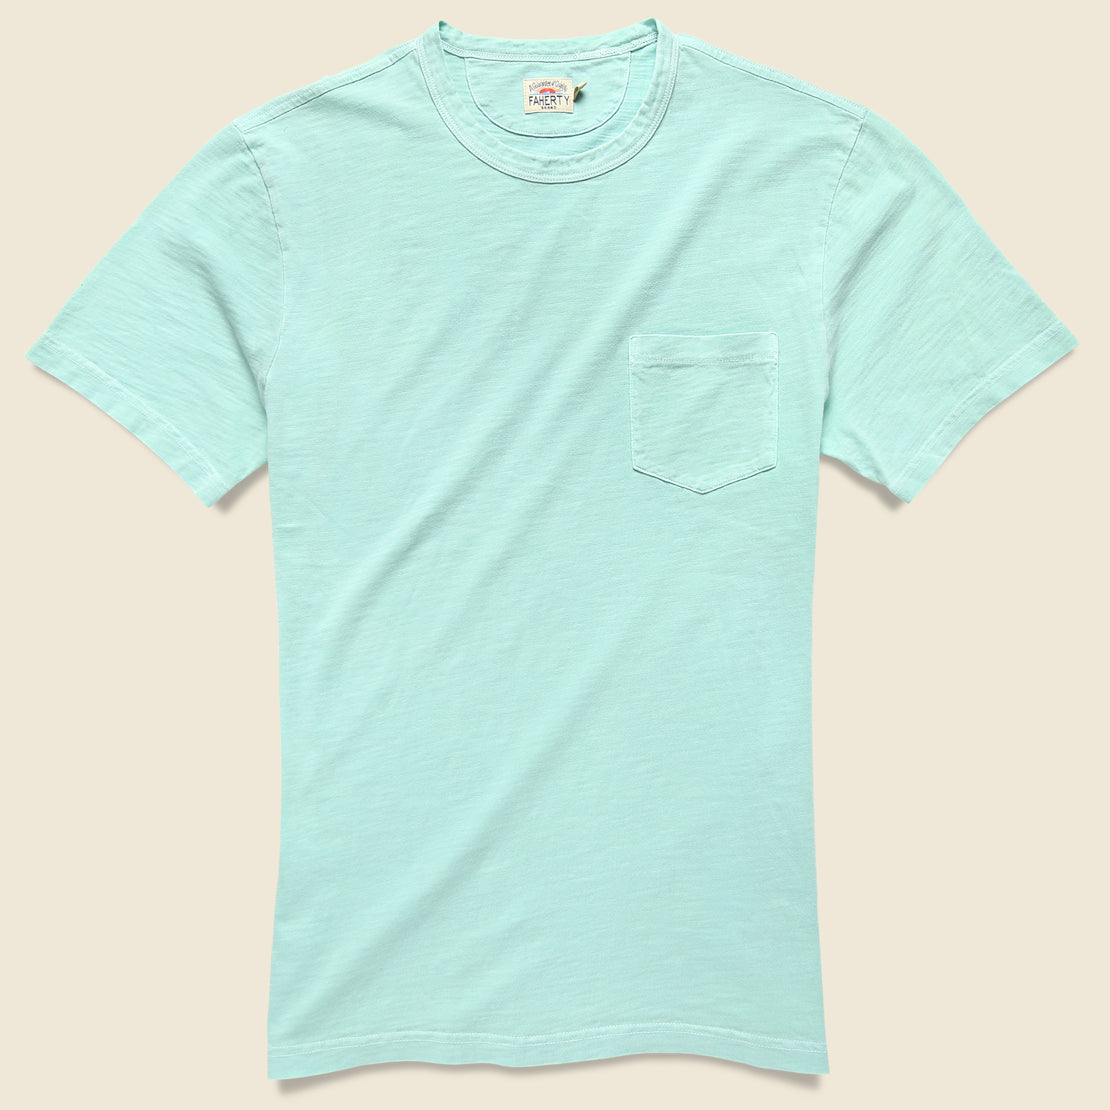 Faherty Garment Dyed Pocket Tee - Water Blue